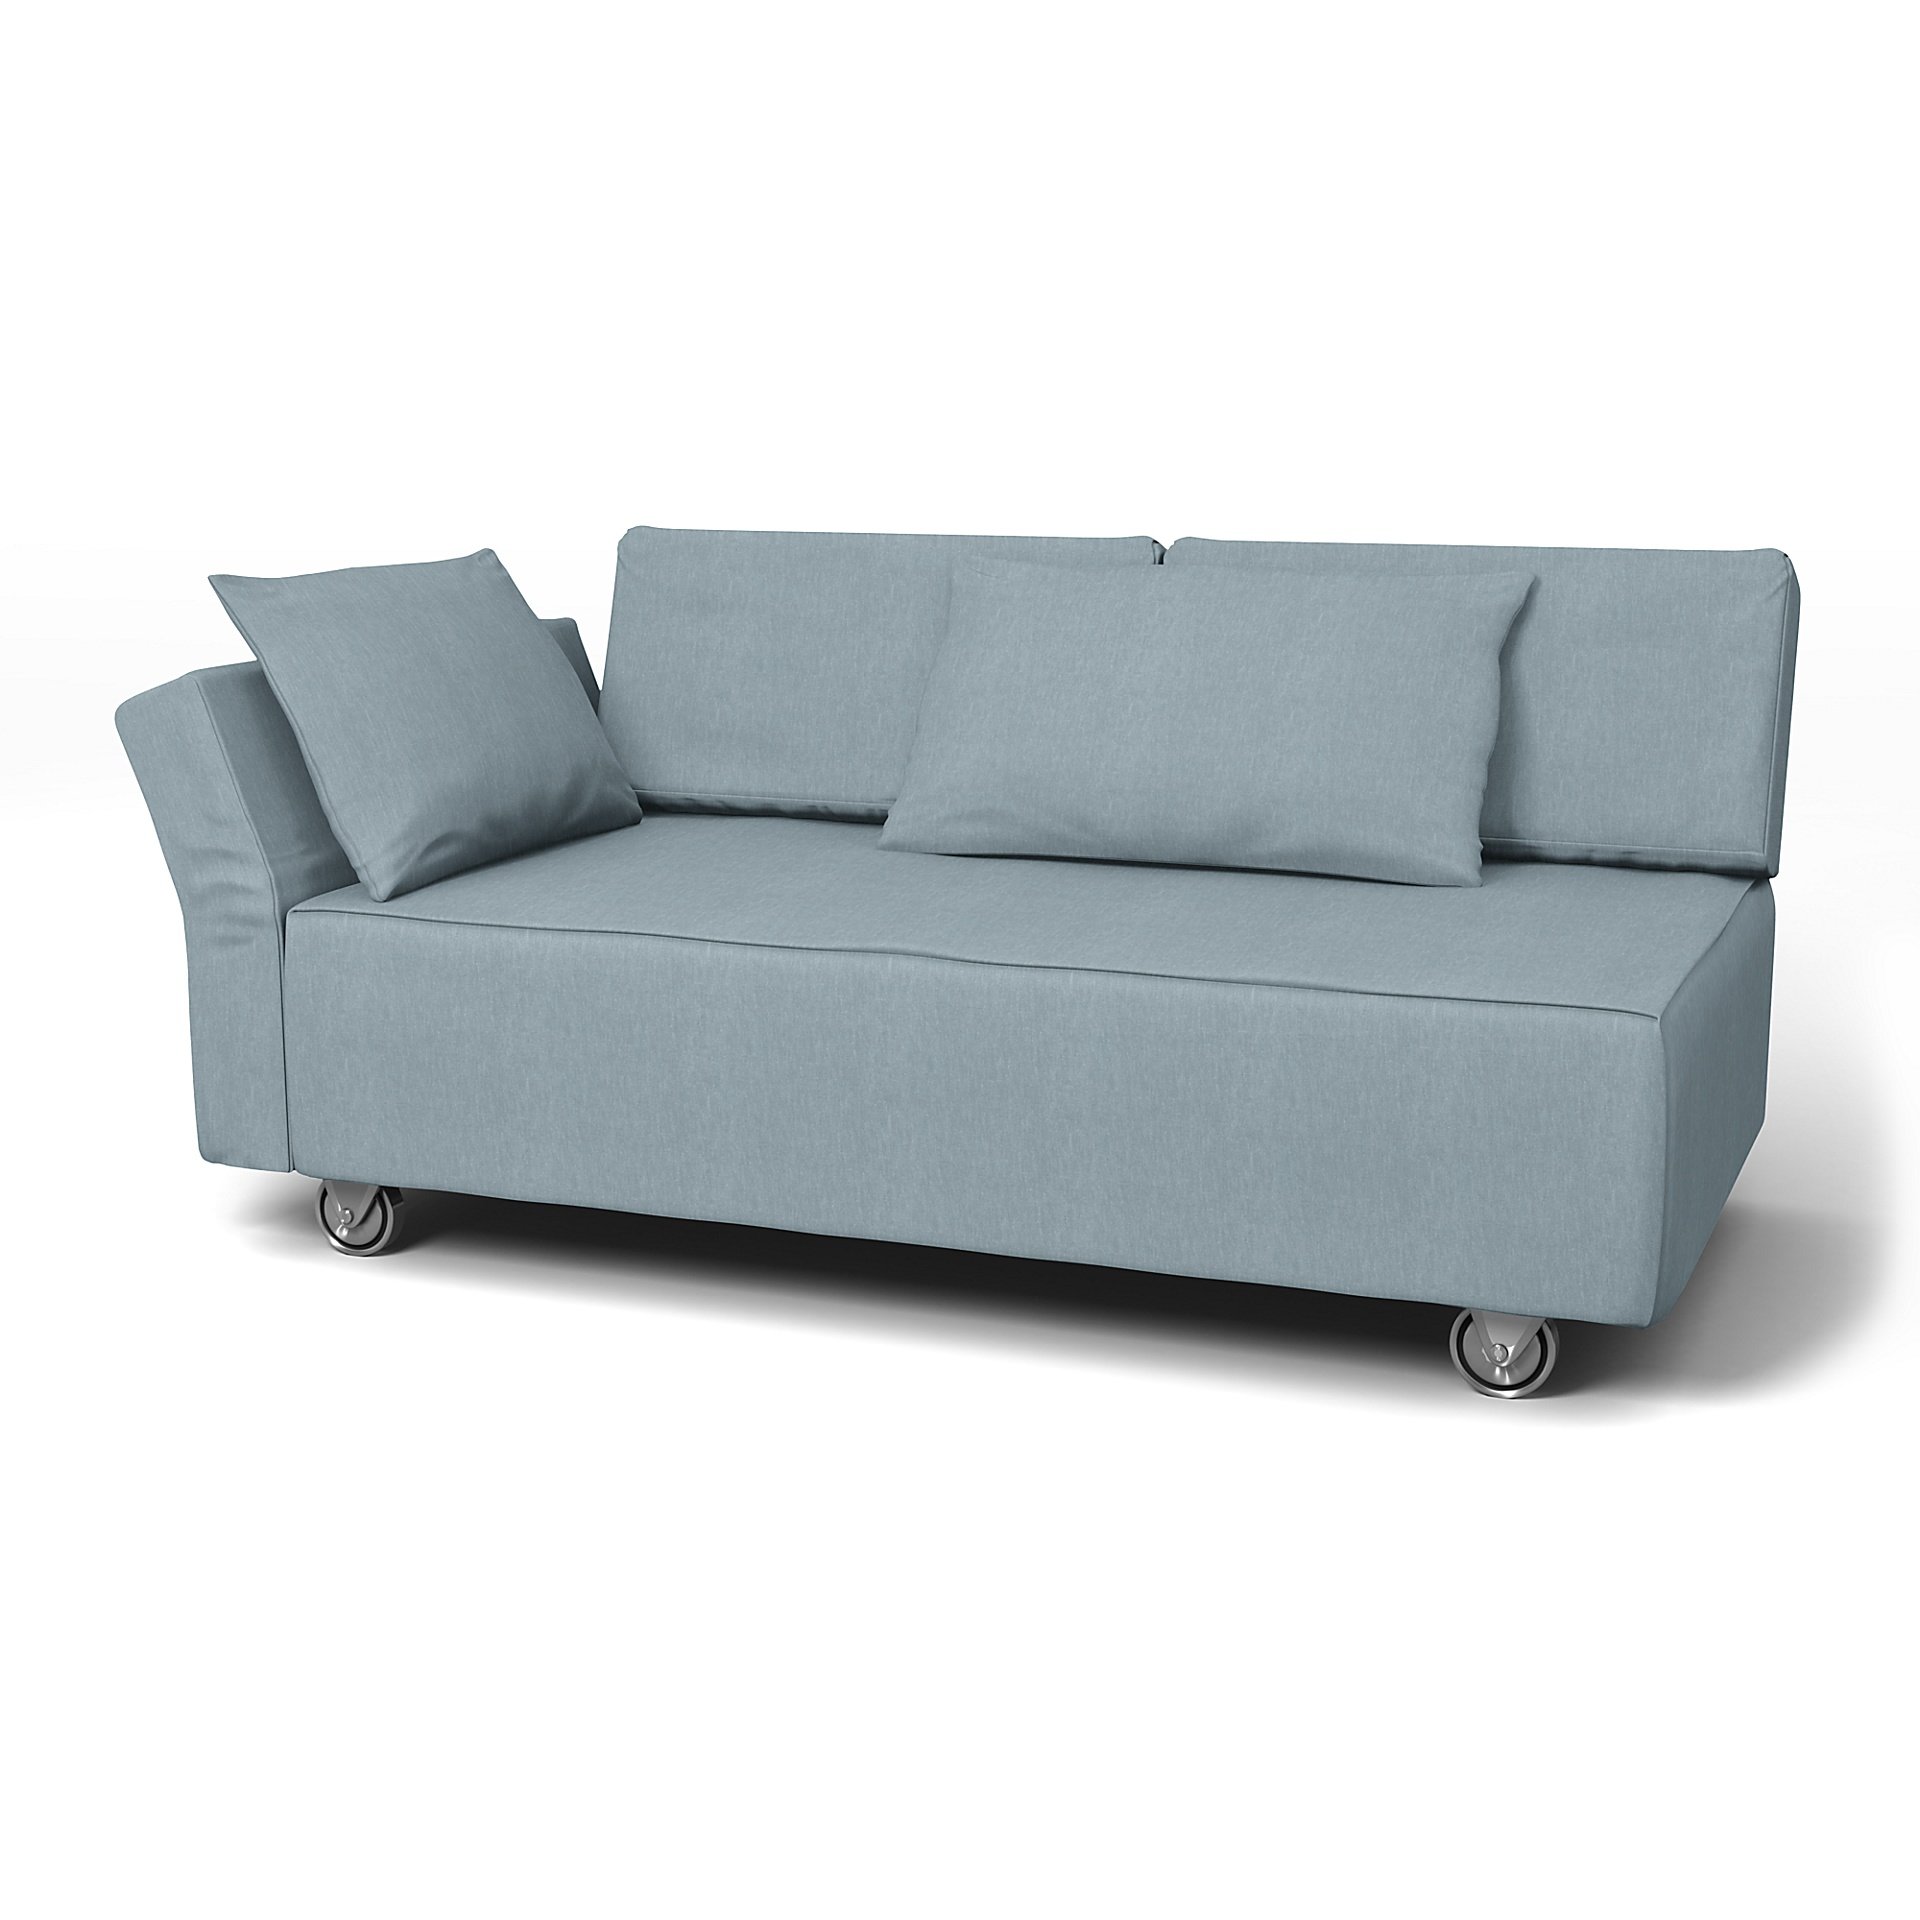 IKEA - Falsterbo 2 Seat Sofa with Left Arm Cover, Dusty Blue, Linen - Bemz